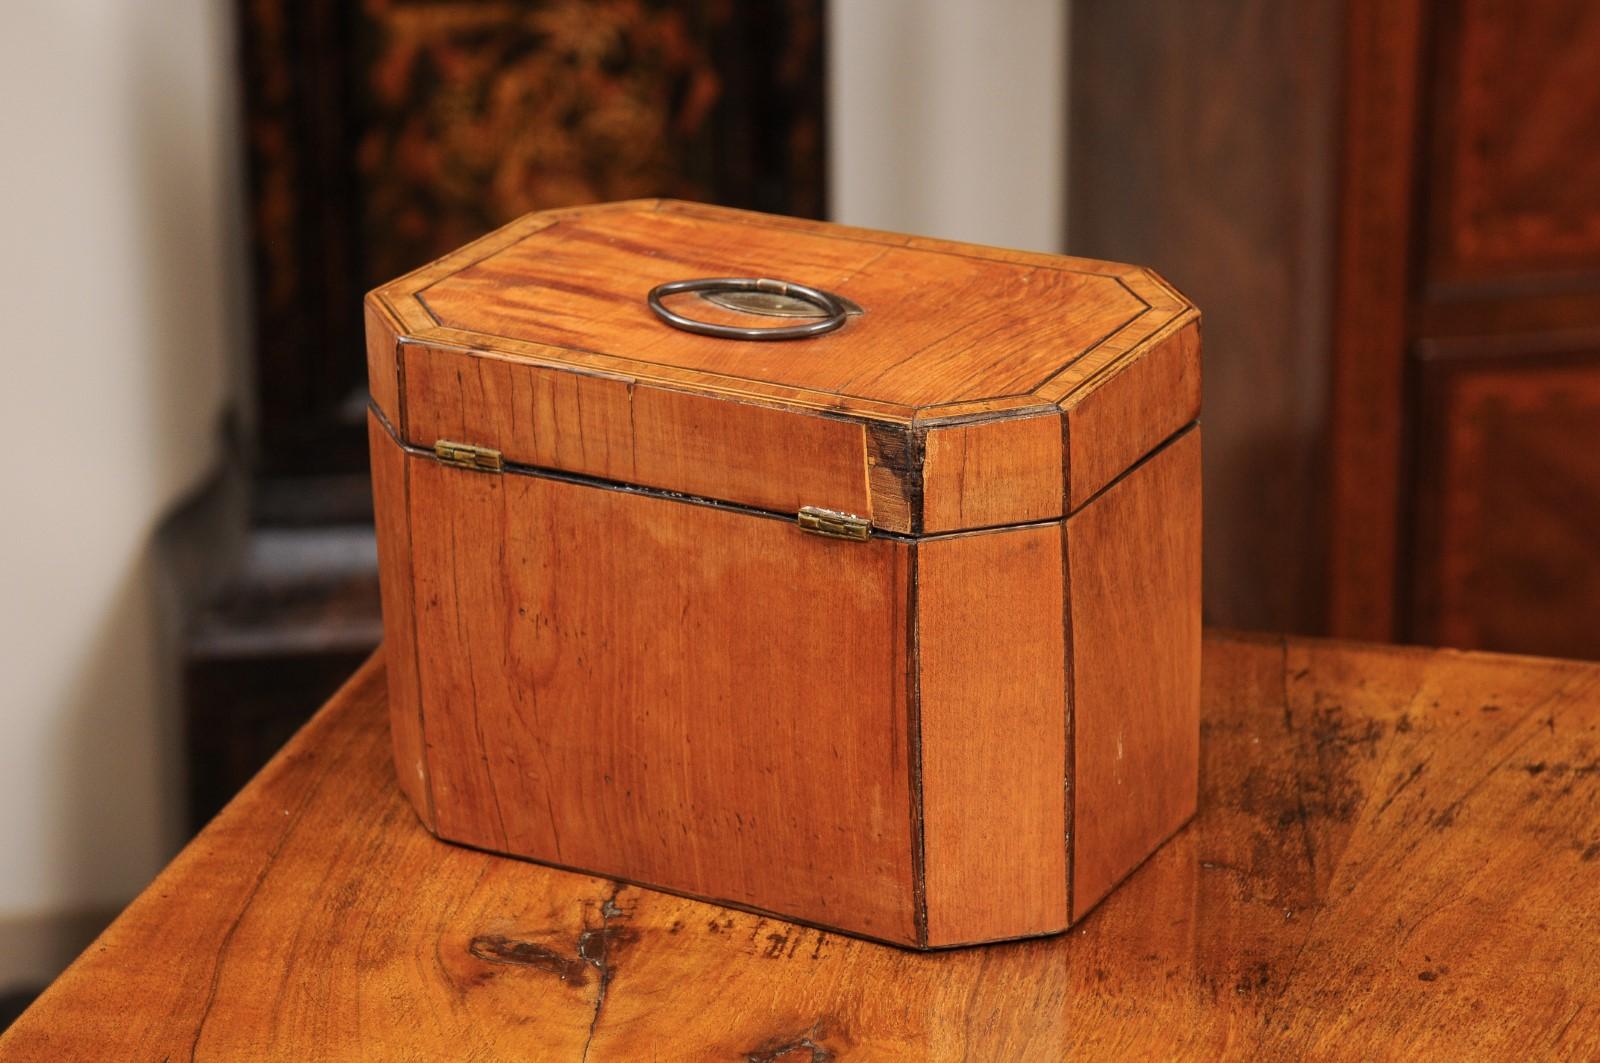  English Octagonal Satinwood Tea Caddy with Rosewood Cross Banding  For Sale 2